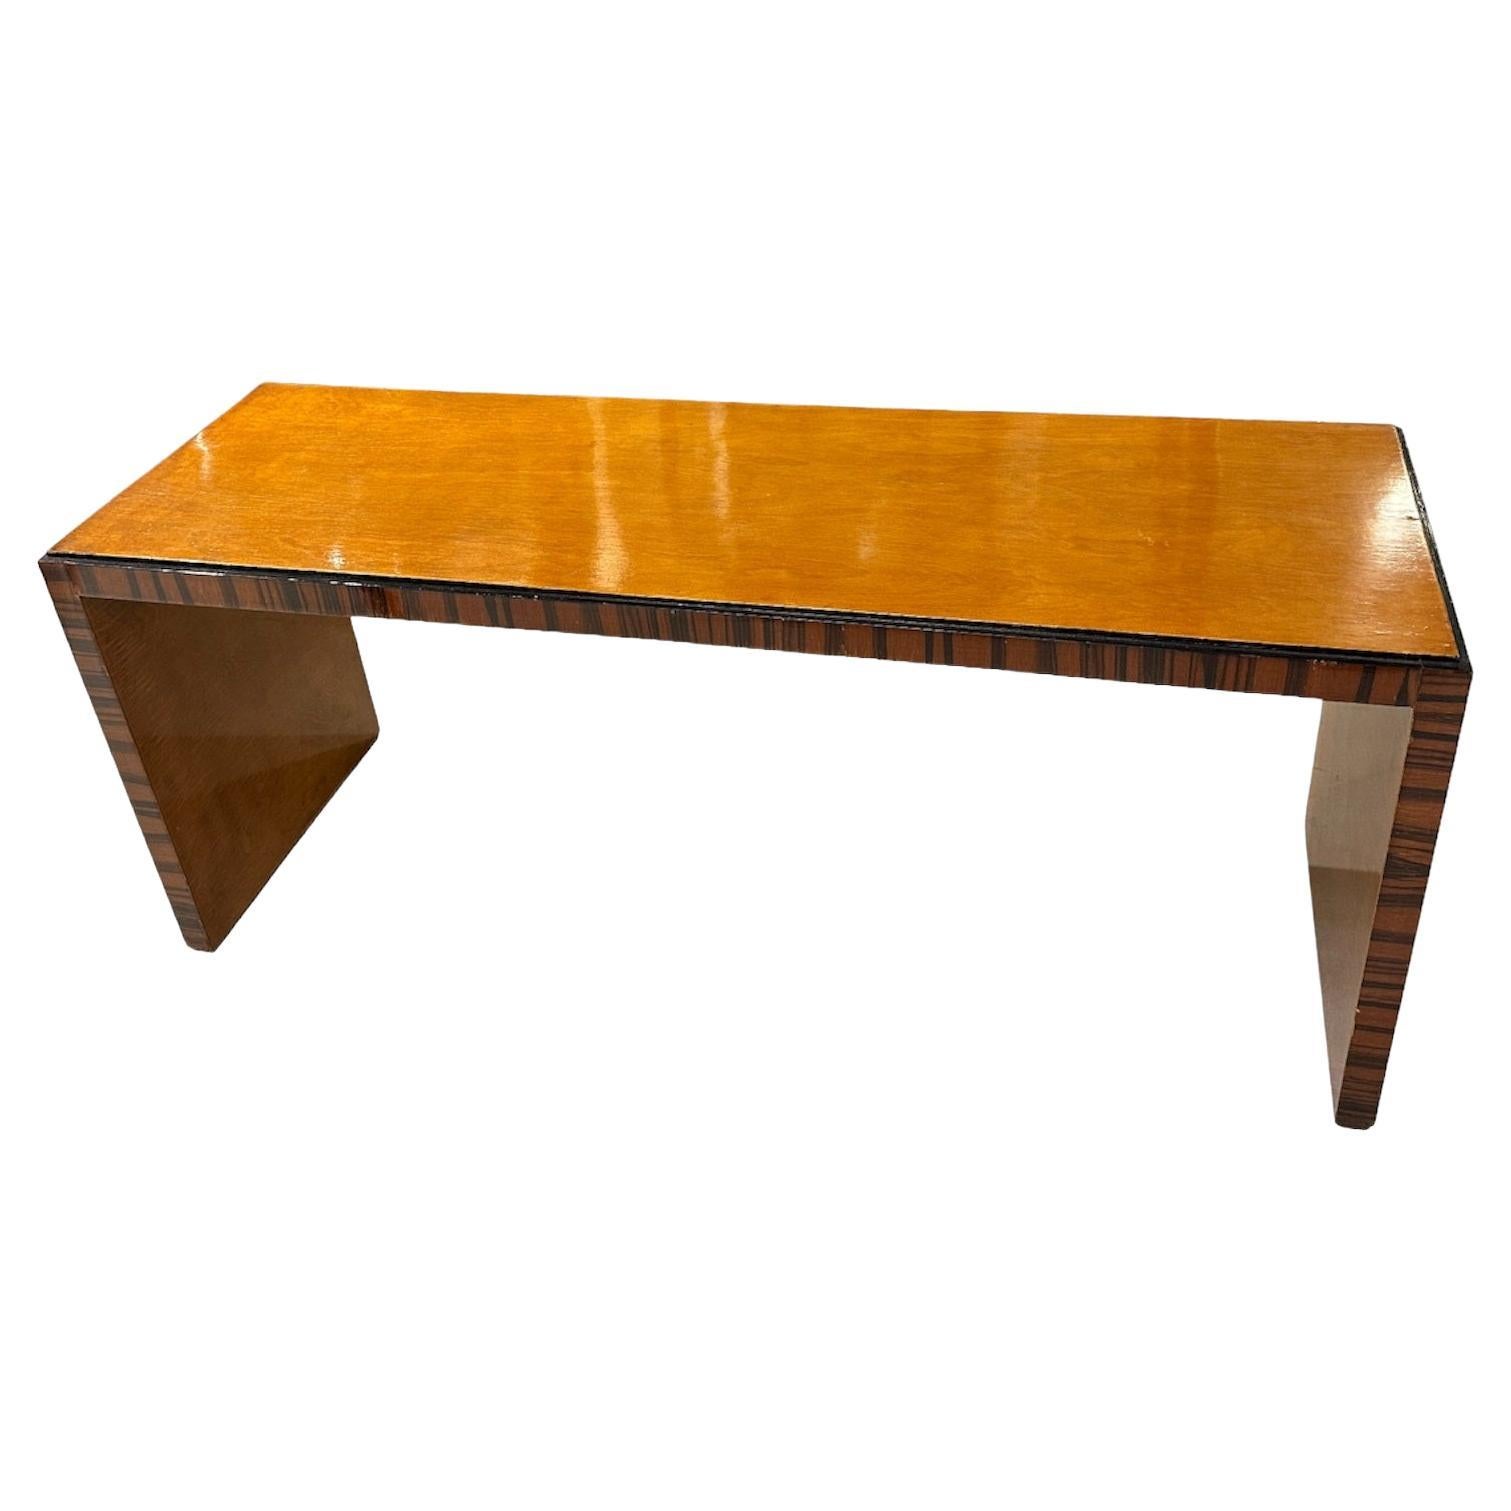 Art Deco Coffe Table in Wood, 1920, France